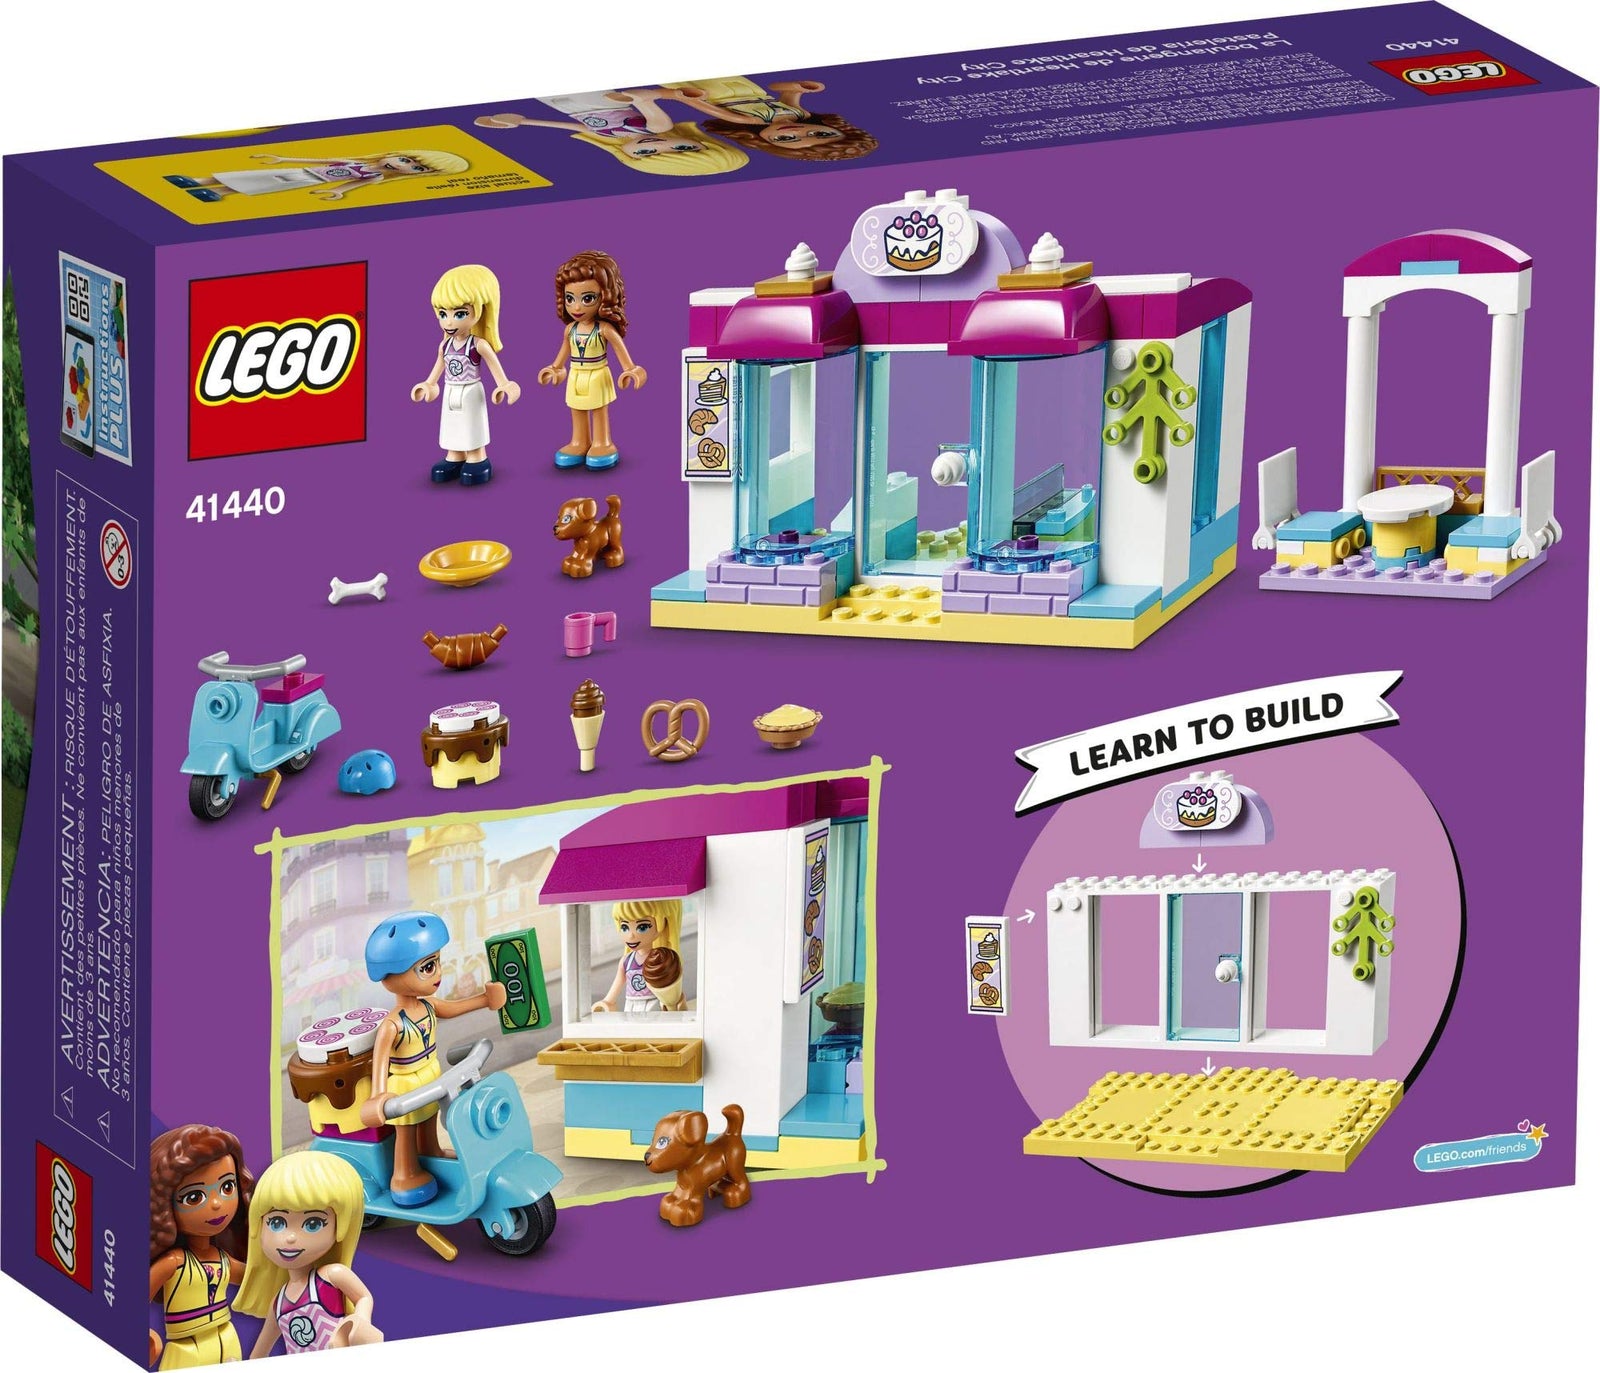 LEGO Friends Heartlake City Bakery 41440 Building Kit; Kids Café Toy Playset Friends Stephanie and Olivia; Collectible Toy, New 2021 (99 Pieces)